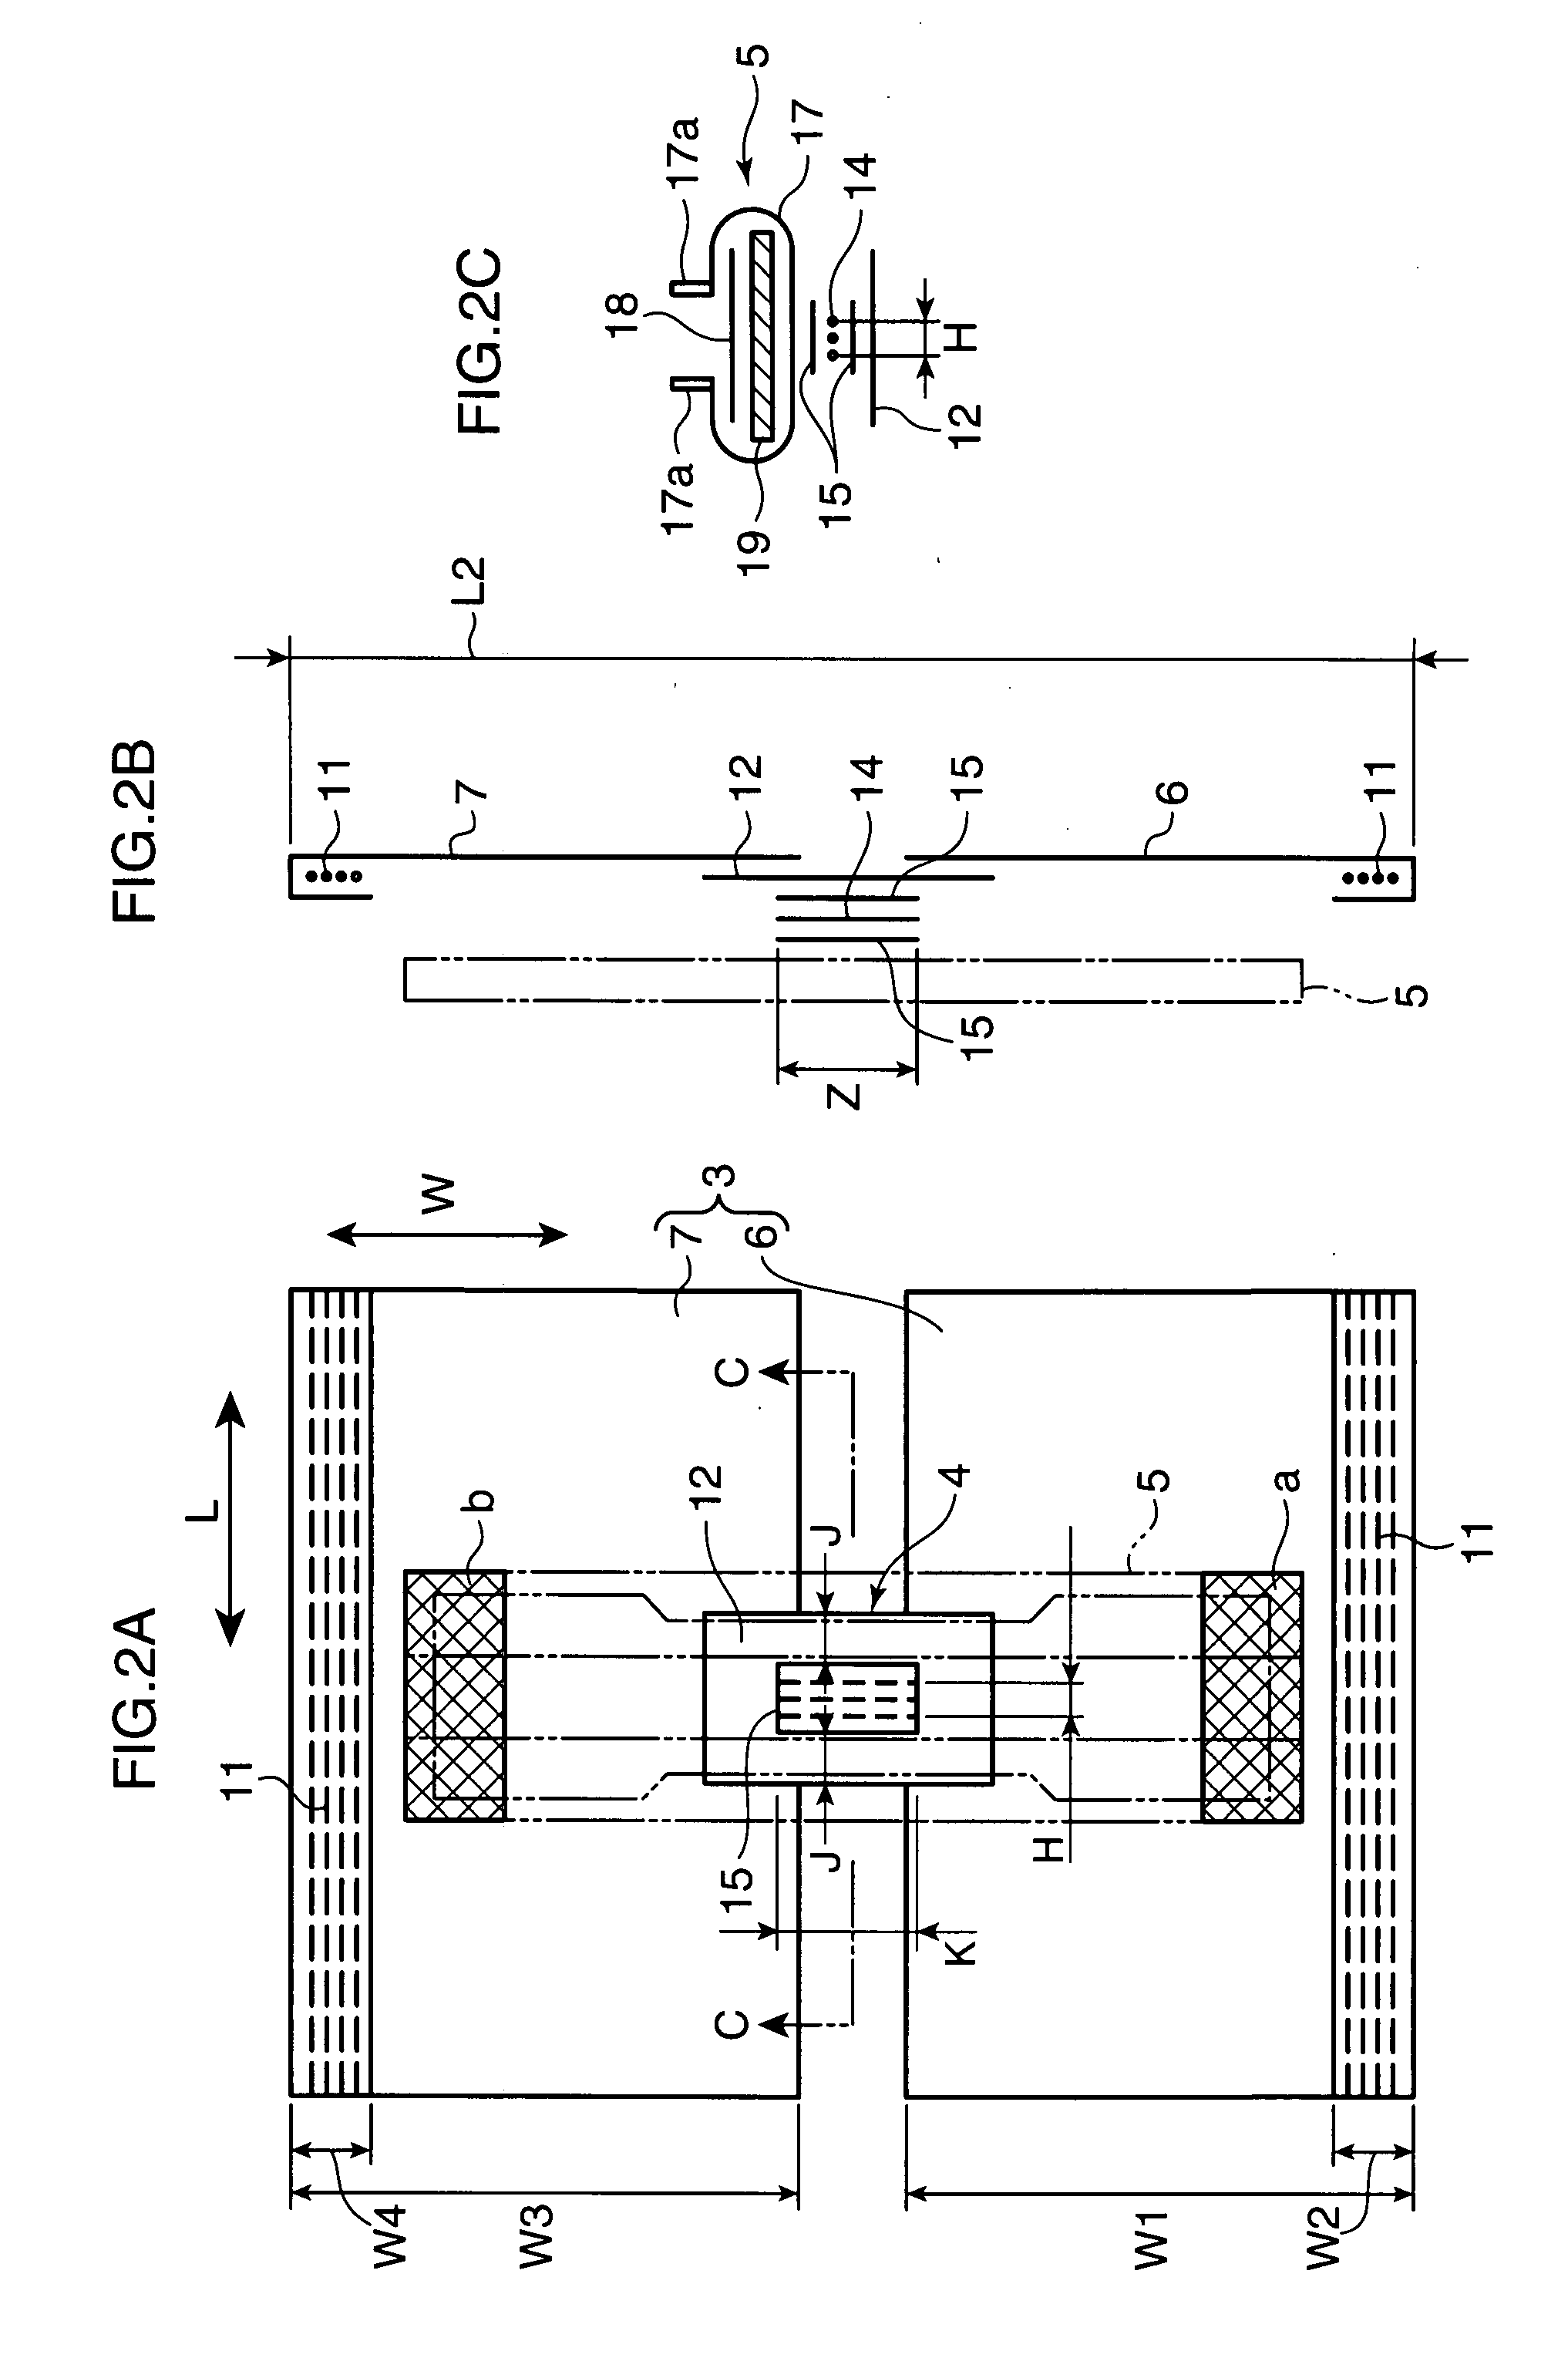 Wearing article and method of manufacturing the same